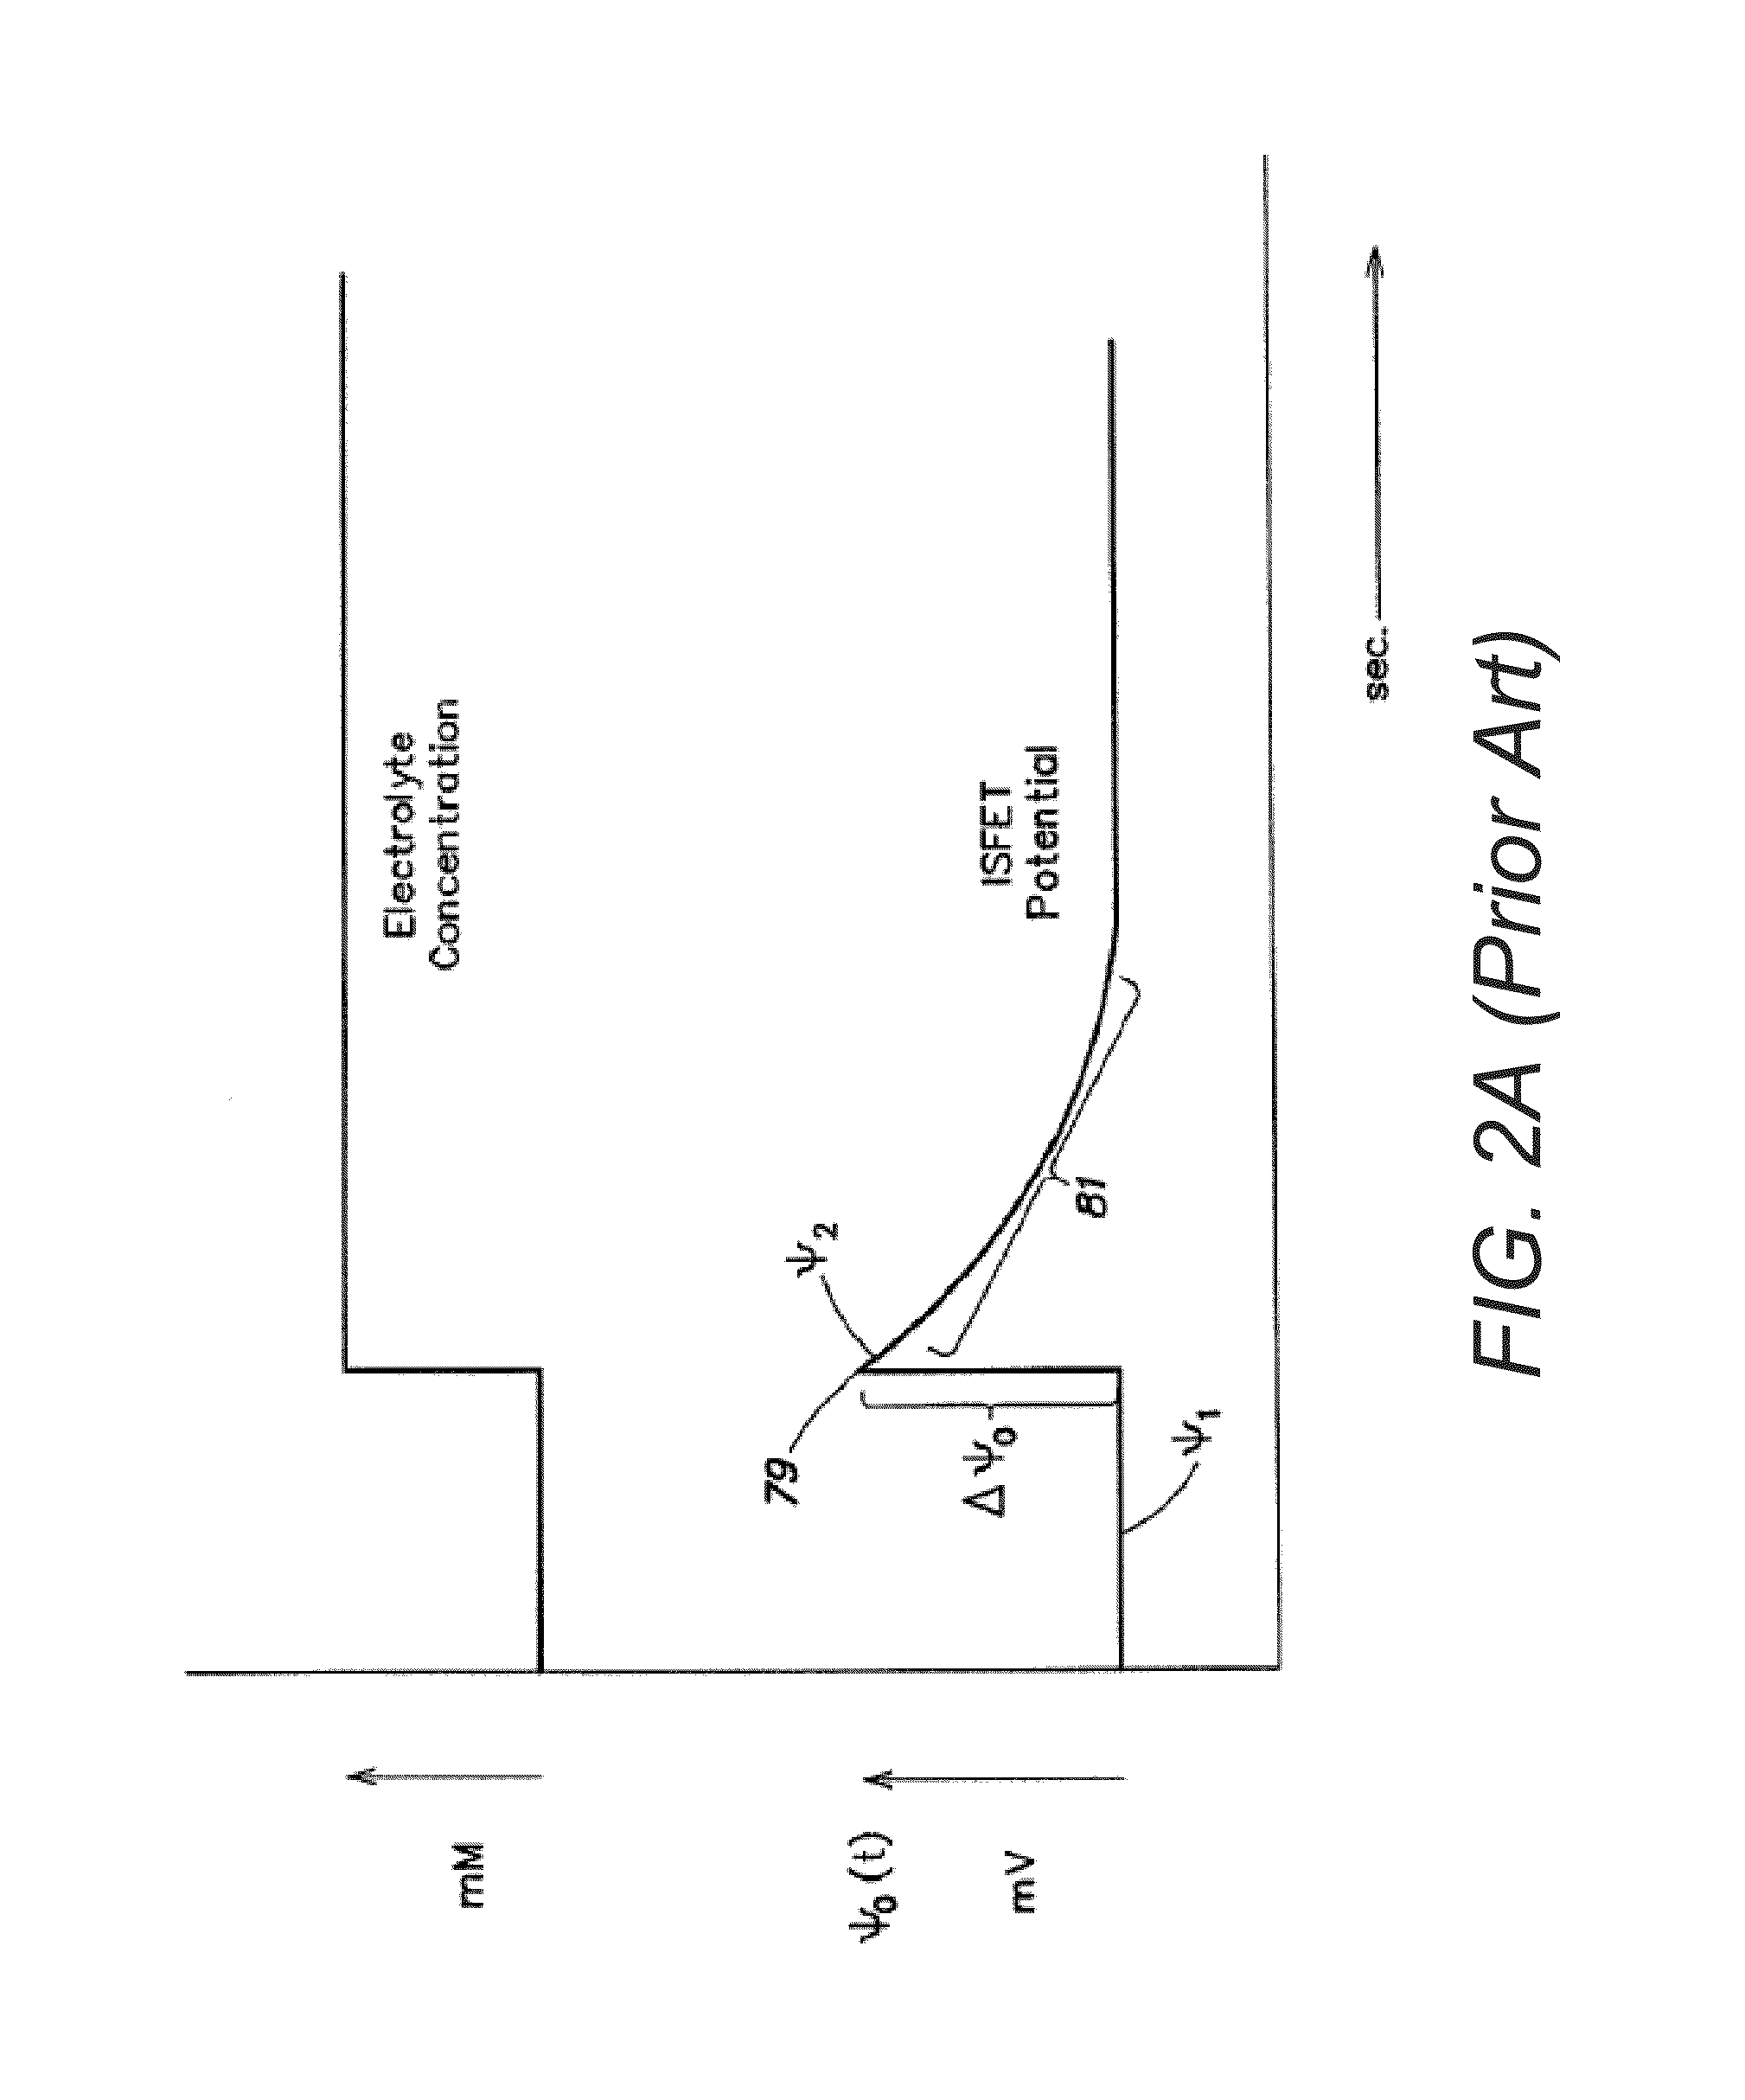 Chemically-sensitive field effect transistor based pixel array with protection diodes